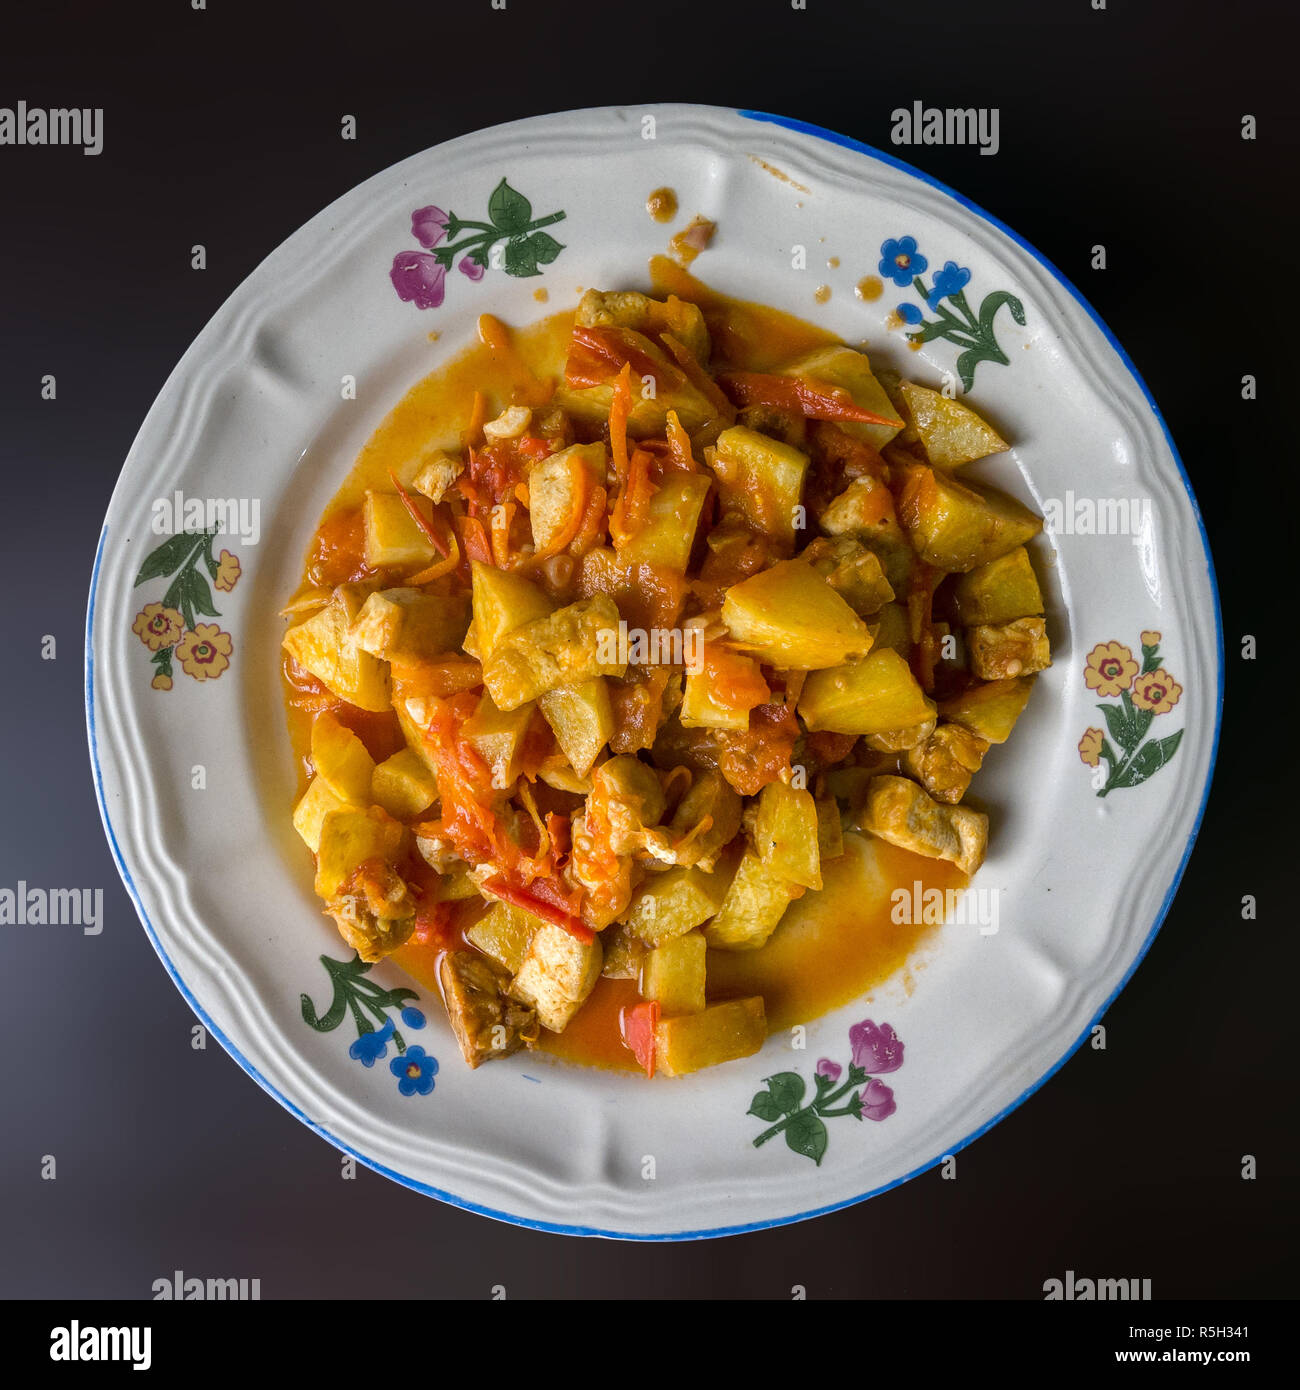 Authentic Indonesian food from family street restaurant. Mixed tofu potato and tempe cooked in tomato and carrot sauce. Delicious Stock Photo